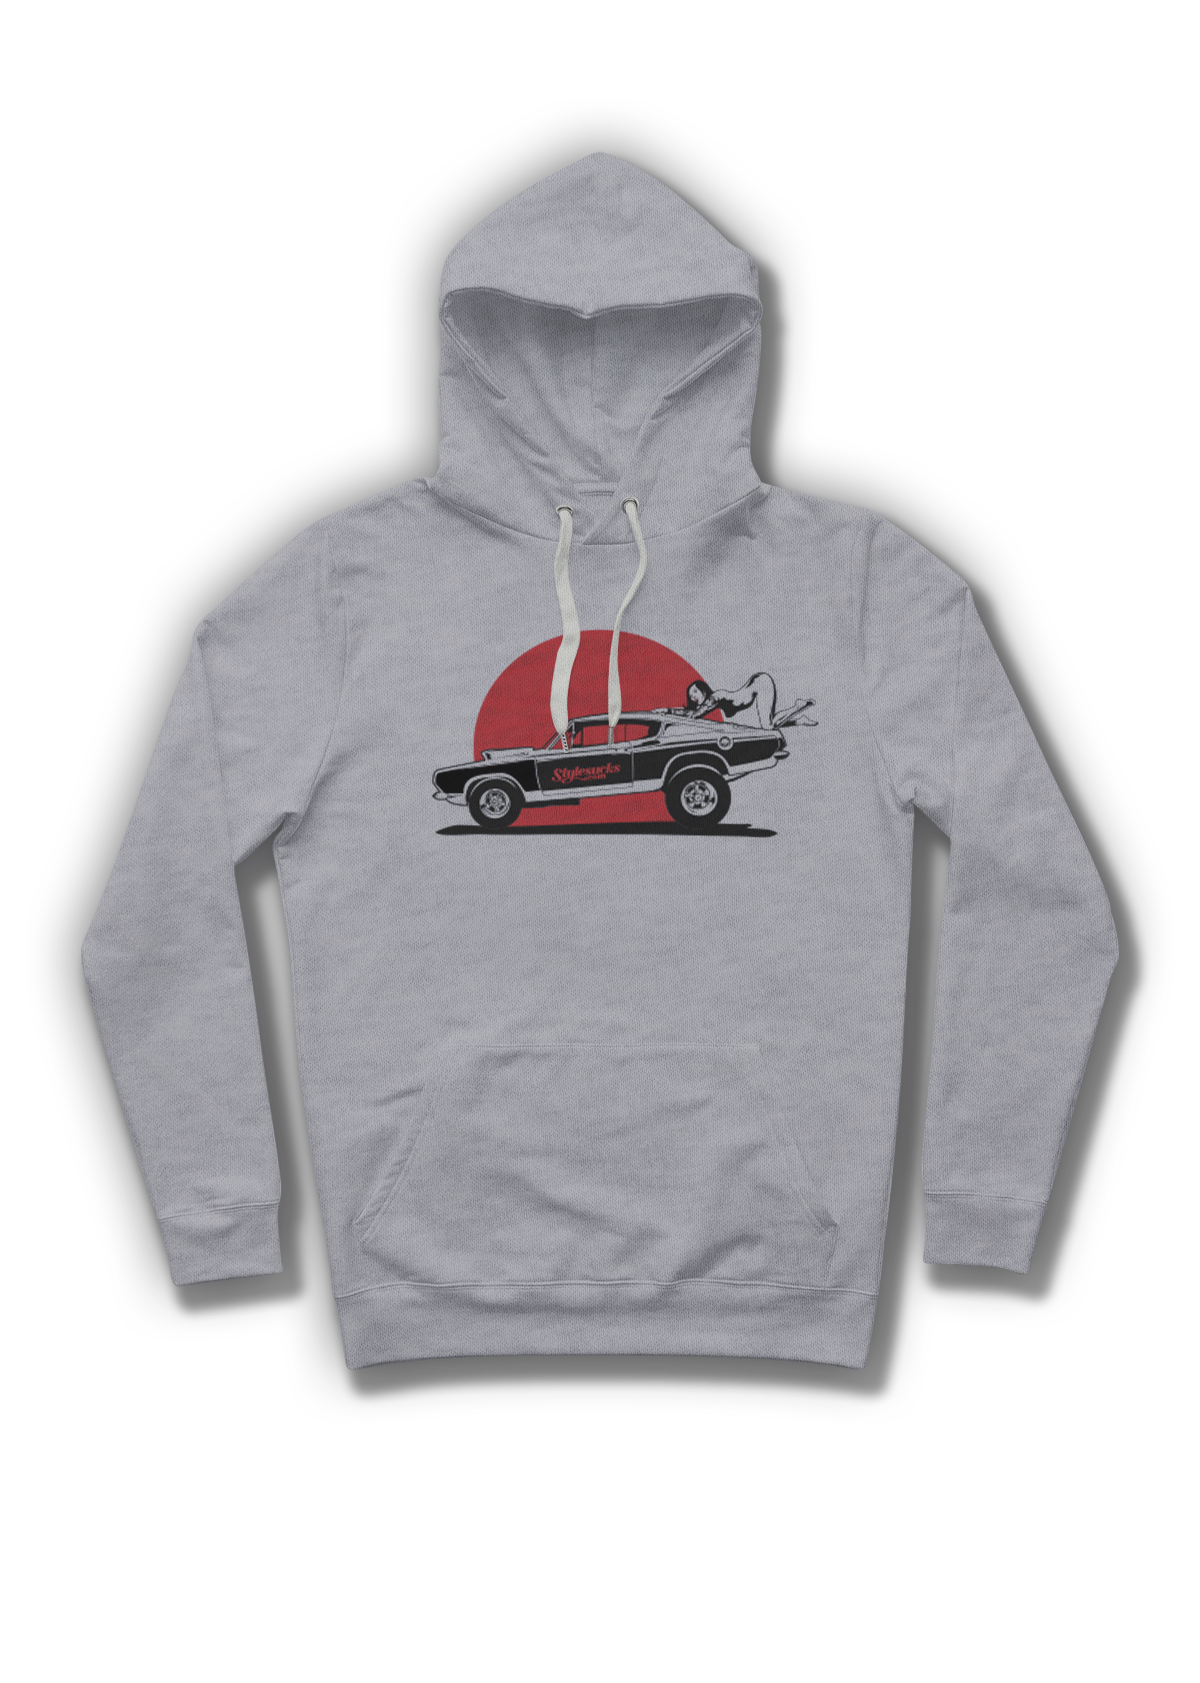 Gettin' forward in style Part No.4 Hoodie